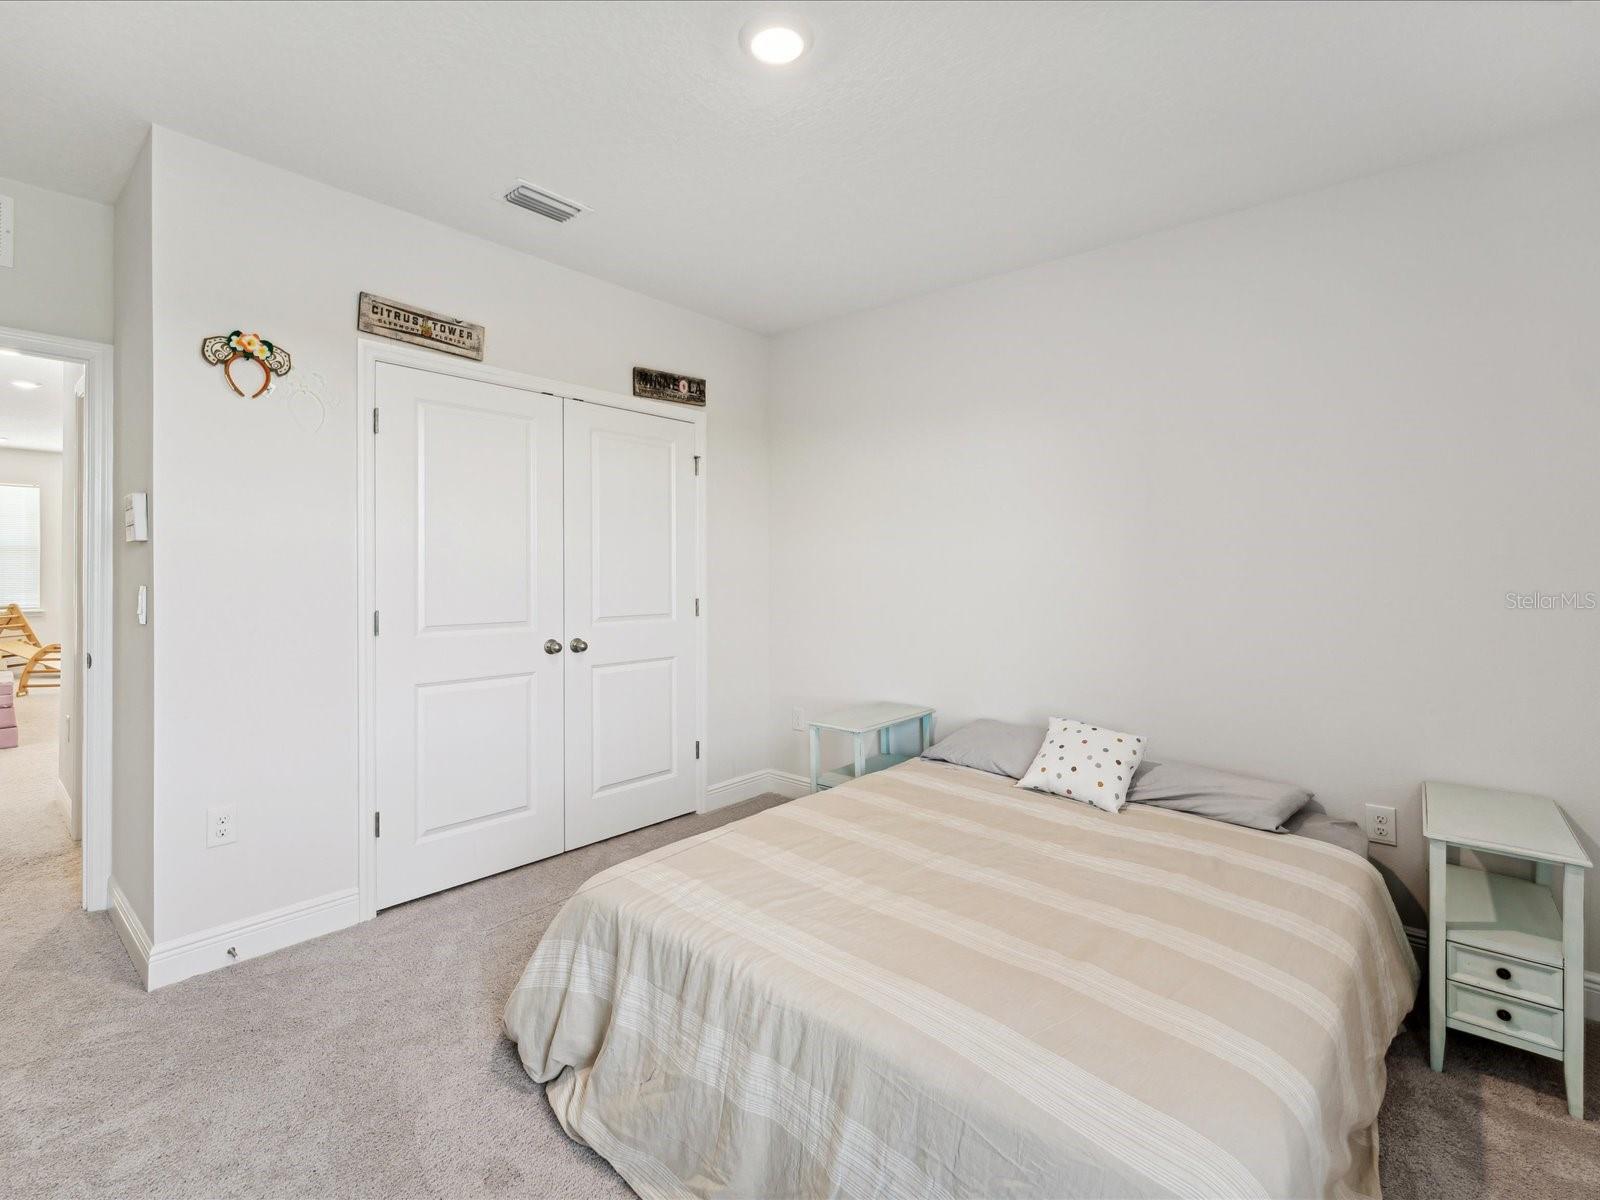 This bedroom has a double door closet and a a partially obscured entry.